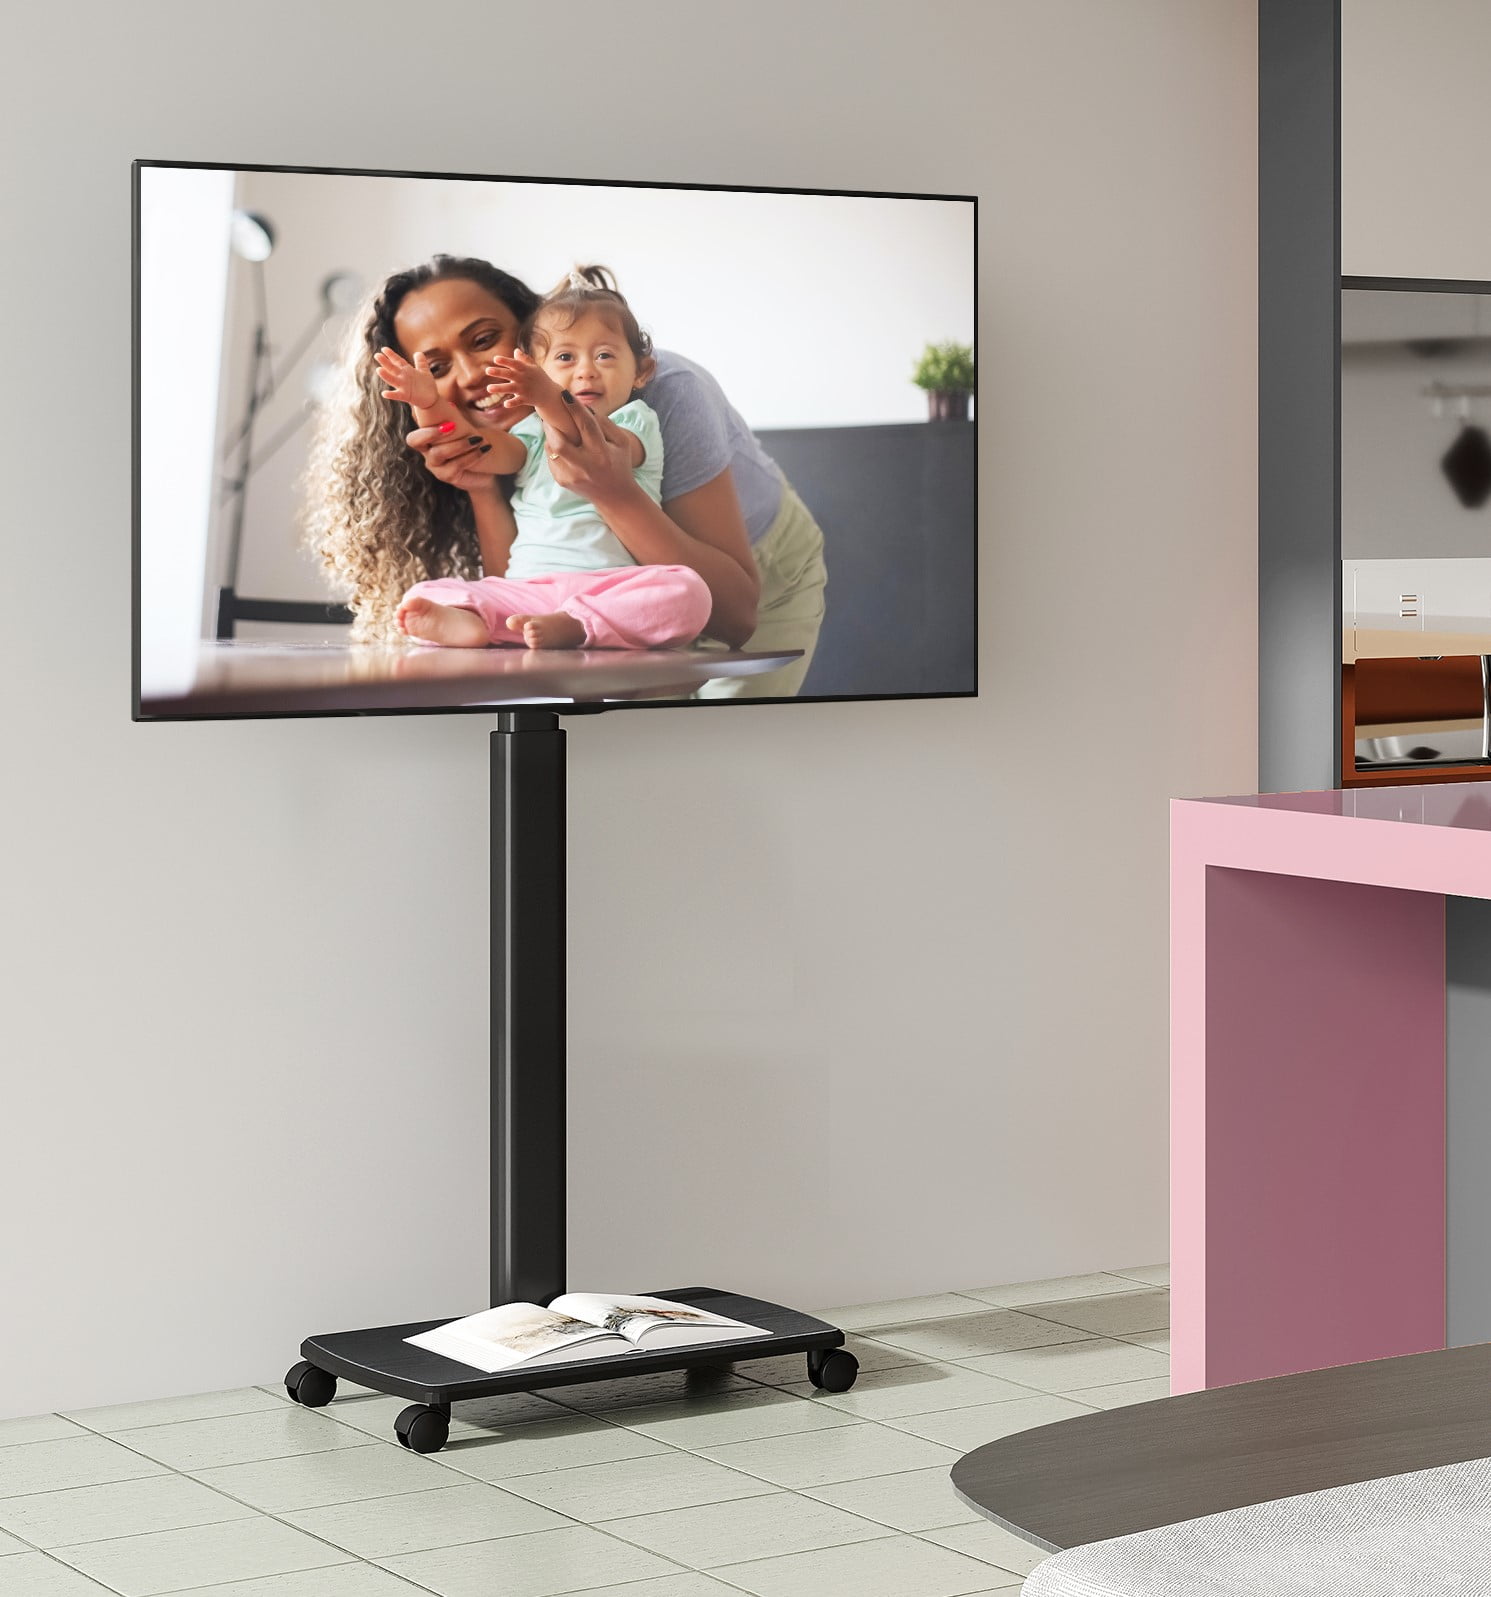 FITUEYES Universal TV Stand with Swivel Mount Height Adjustable for 32 to 65 inch LCD LED OLED TVs 